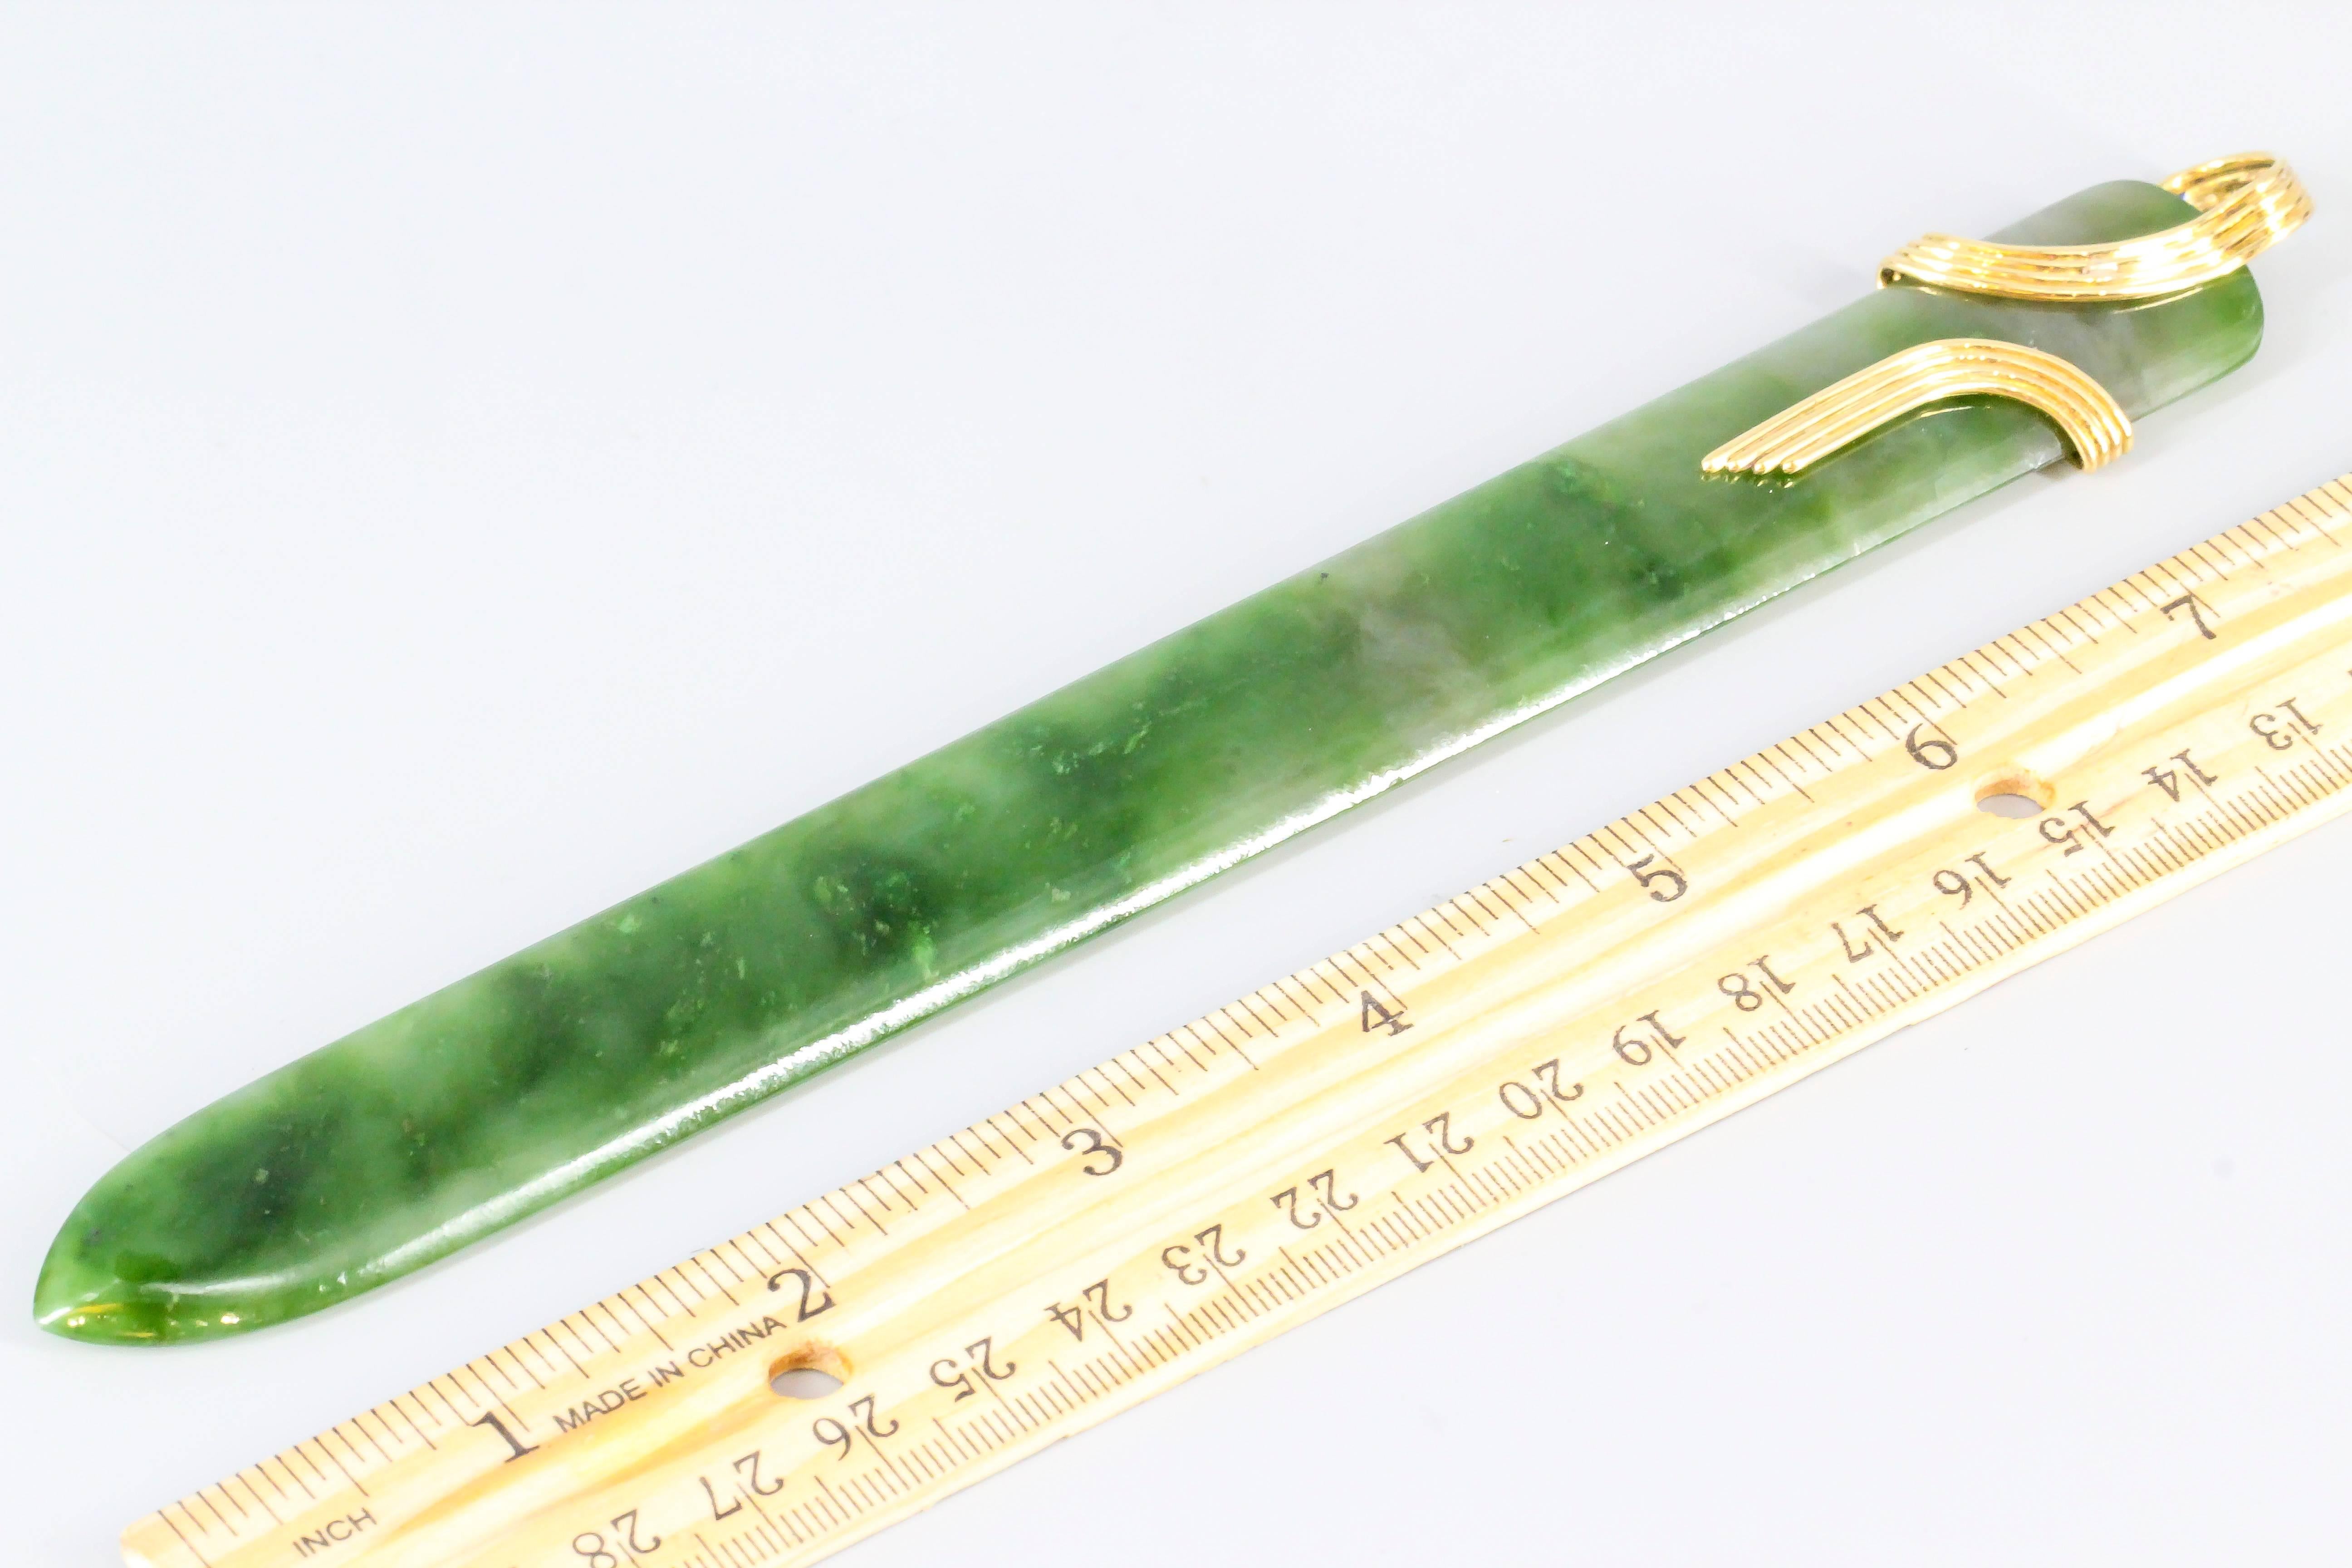 Rare and unusual nephrite and 18K gold letter opener by Tiffany & Co. Schlumberger. 

Hallmarks: Tiffany & Co., Schlumberger, 18k.
